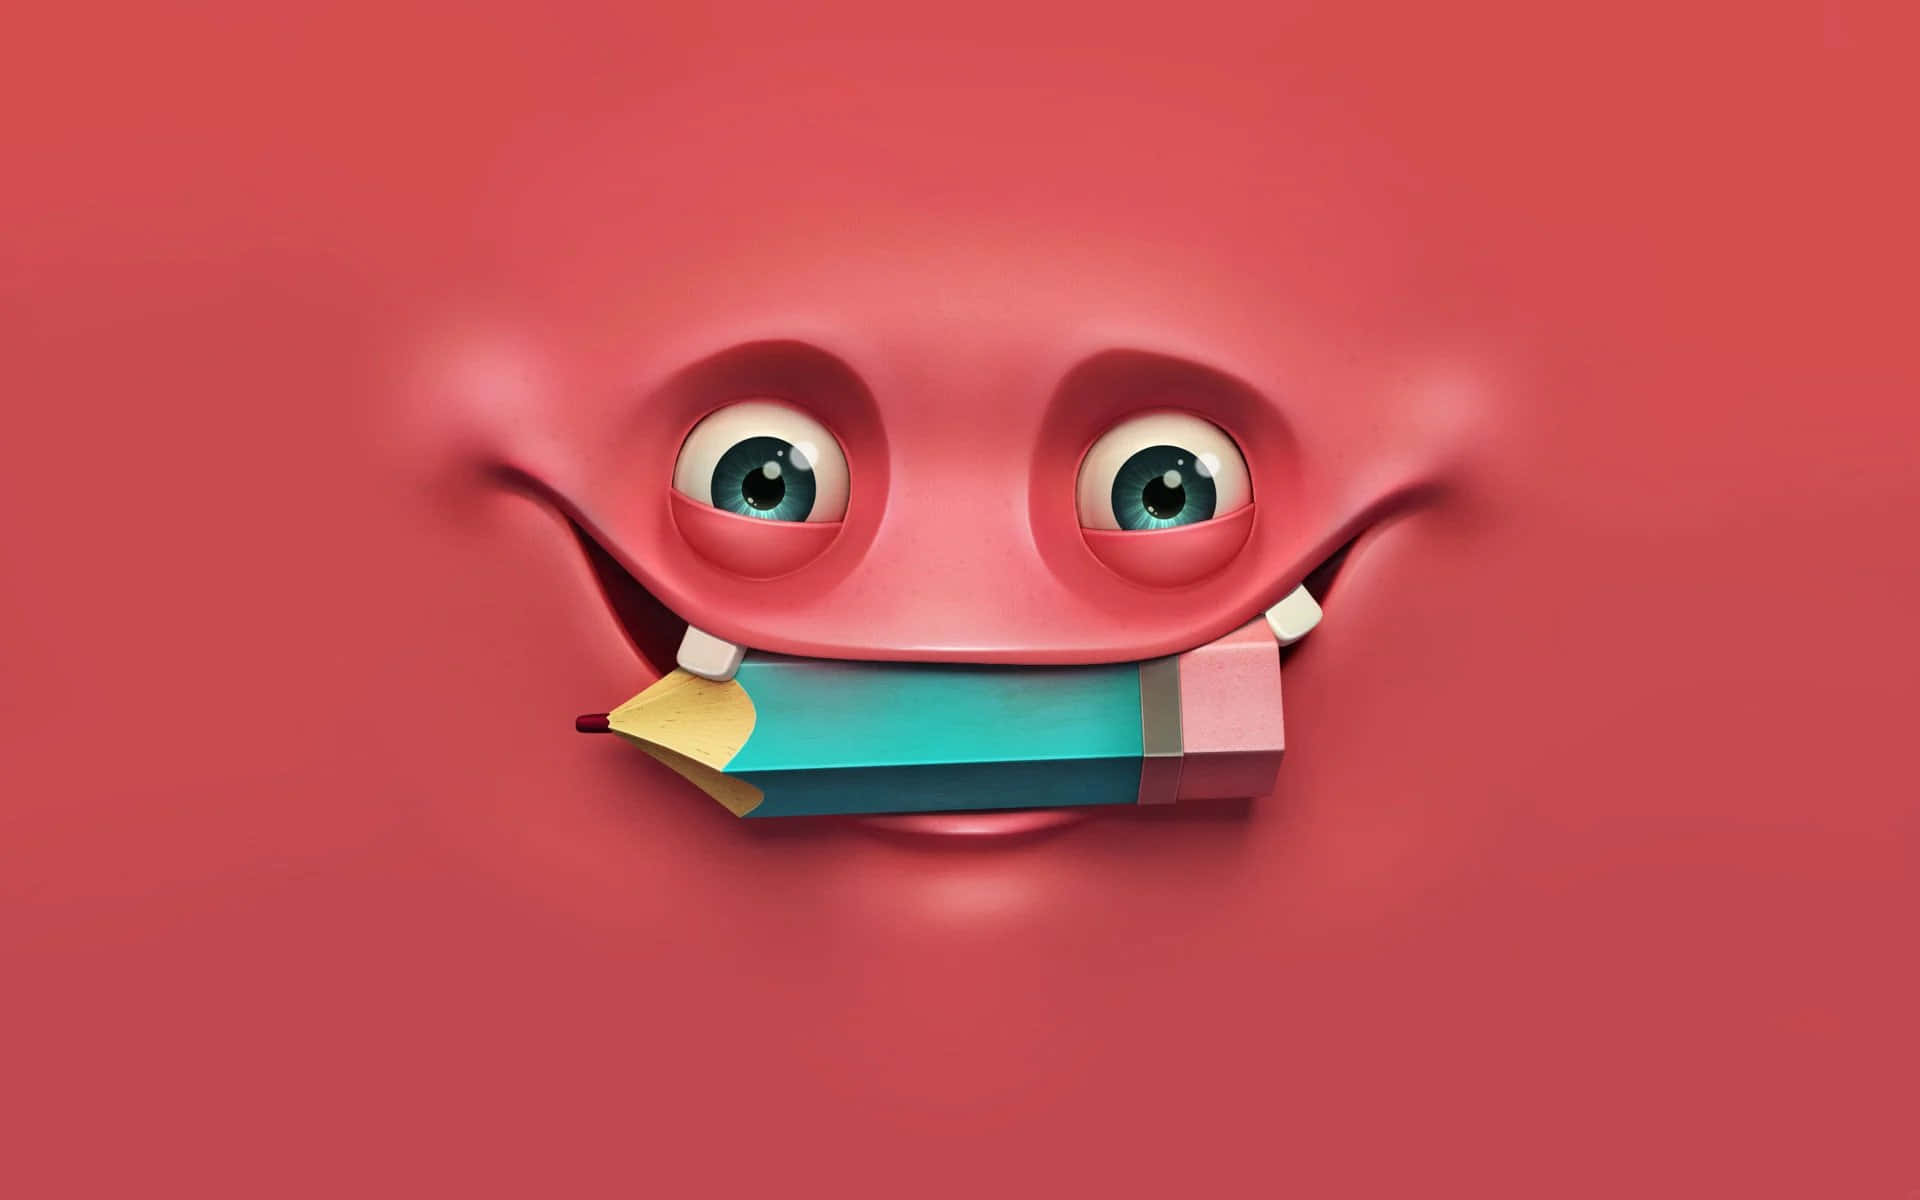 A Cartoon Face With A Pencil In Its Mouth